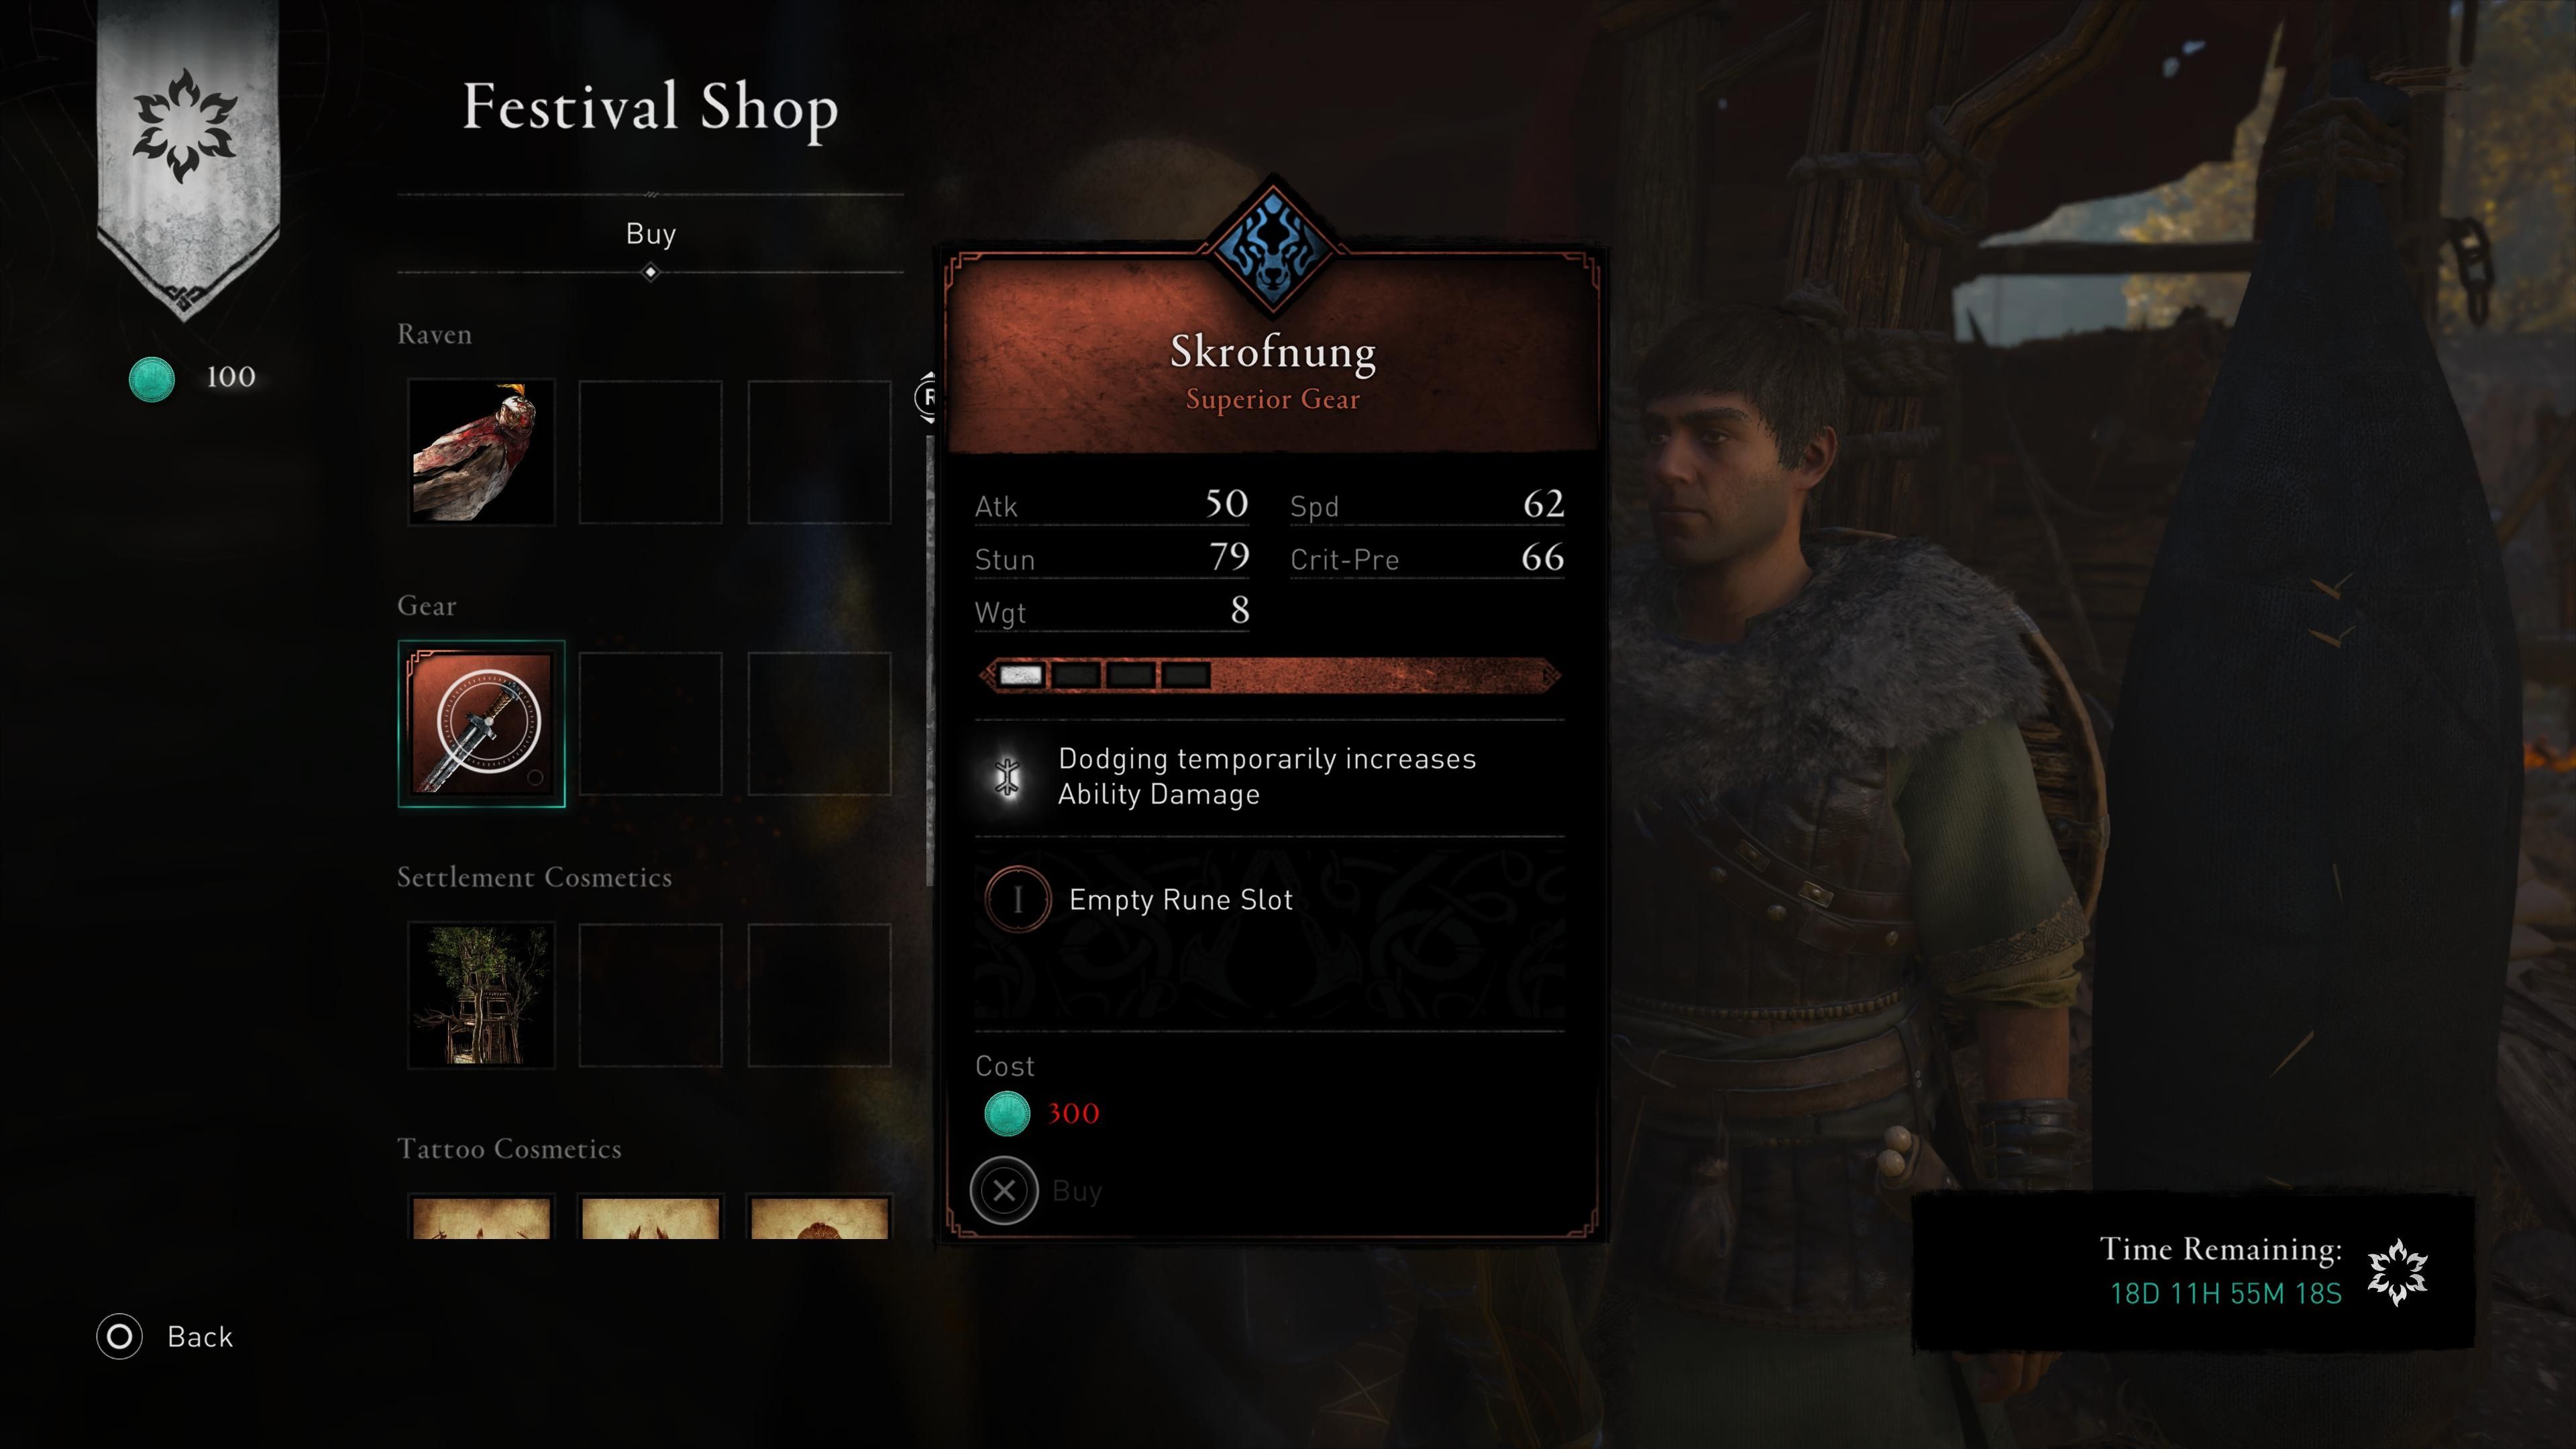 How to buy everything from Norvid's Festival Shop.